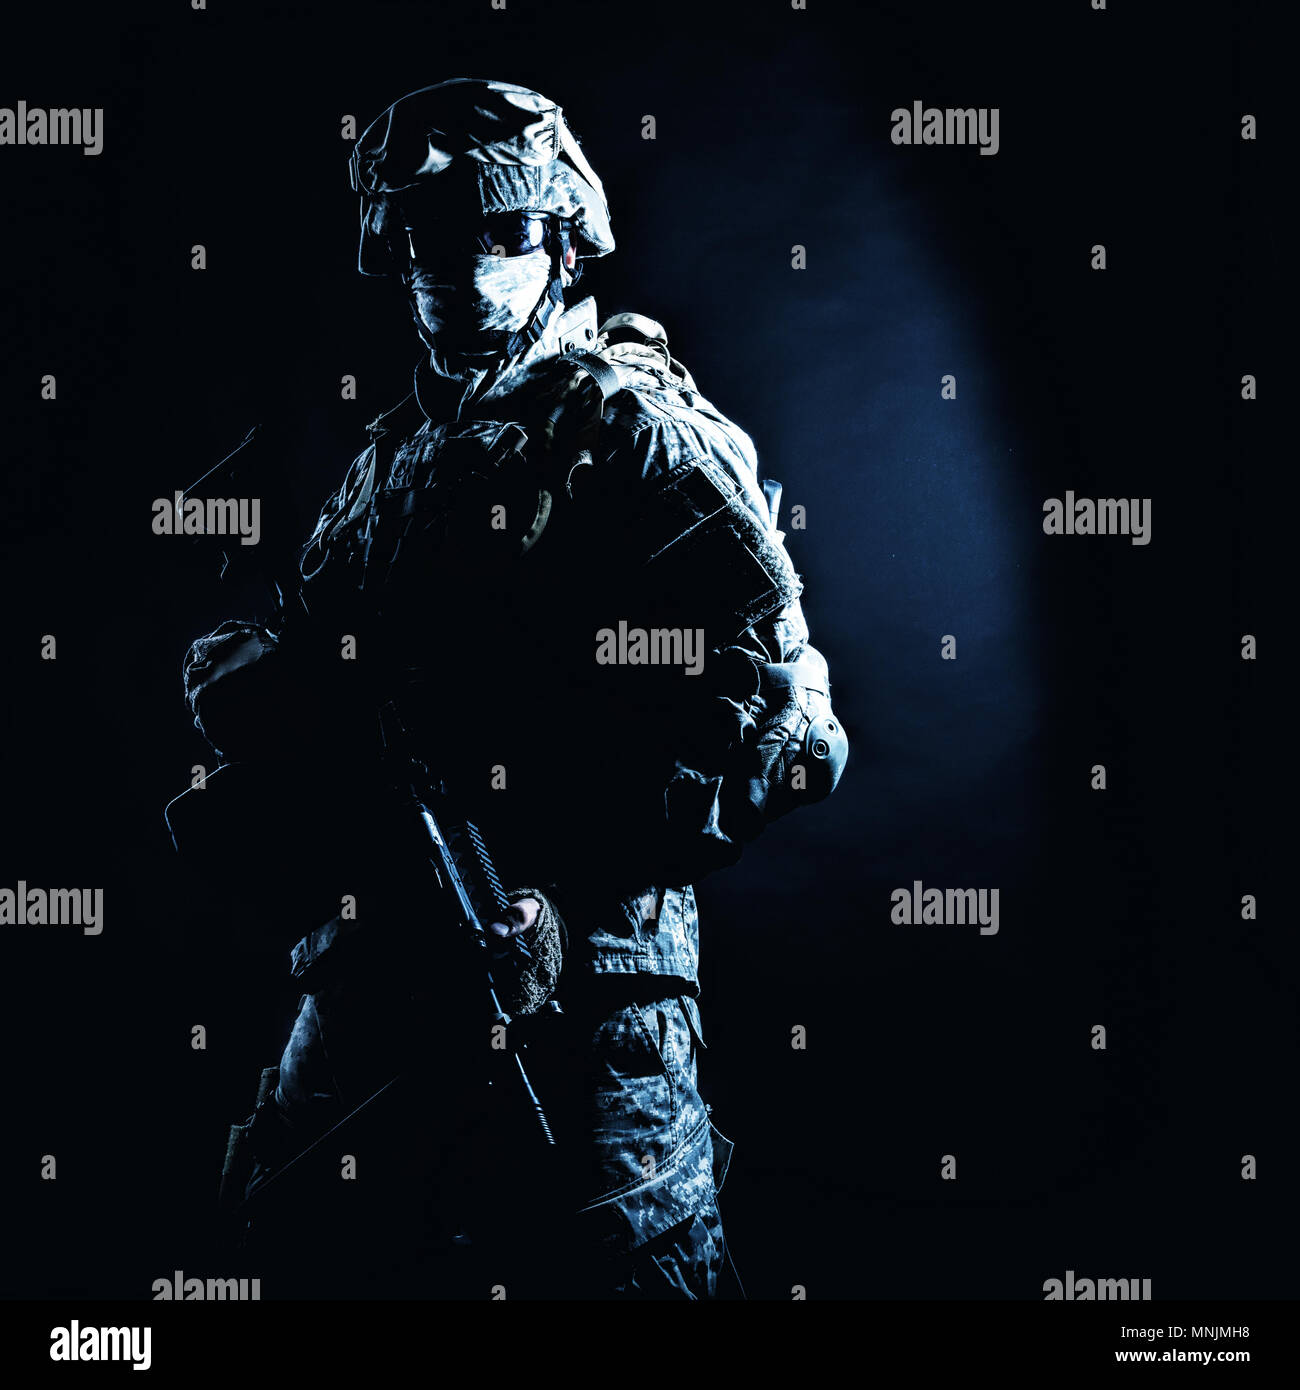 Infantry rifleman standing with weapon in darkness Stock Photo